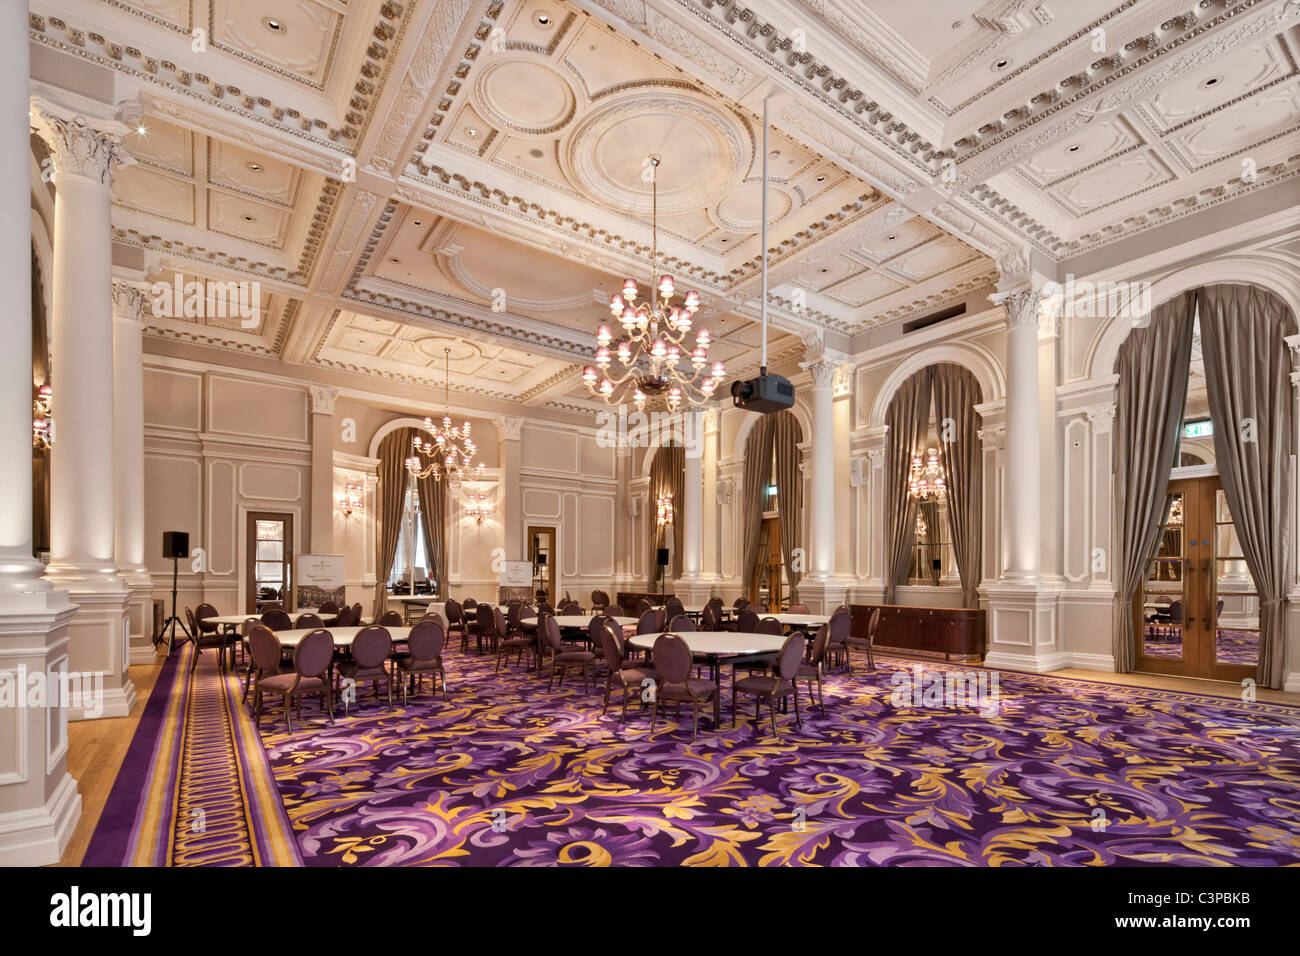 The Corinthia Hotel in Whitehall, London. Opened in April 2011. Stock Photo